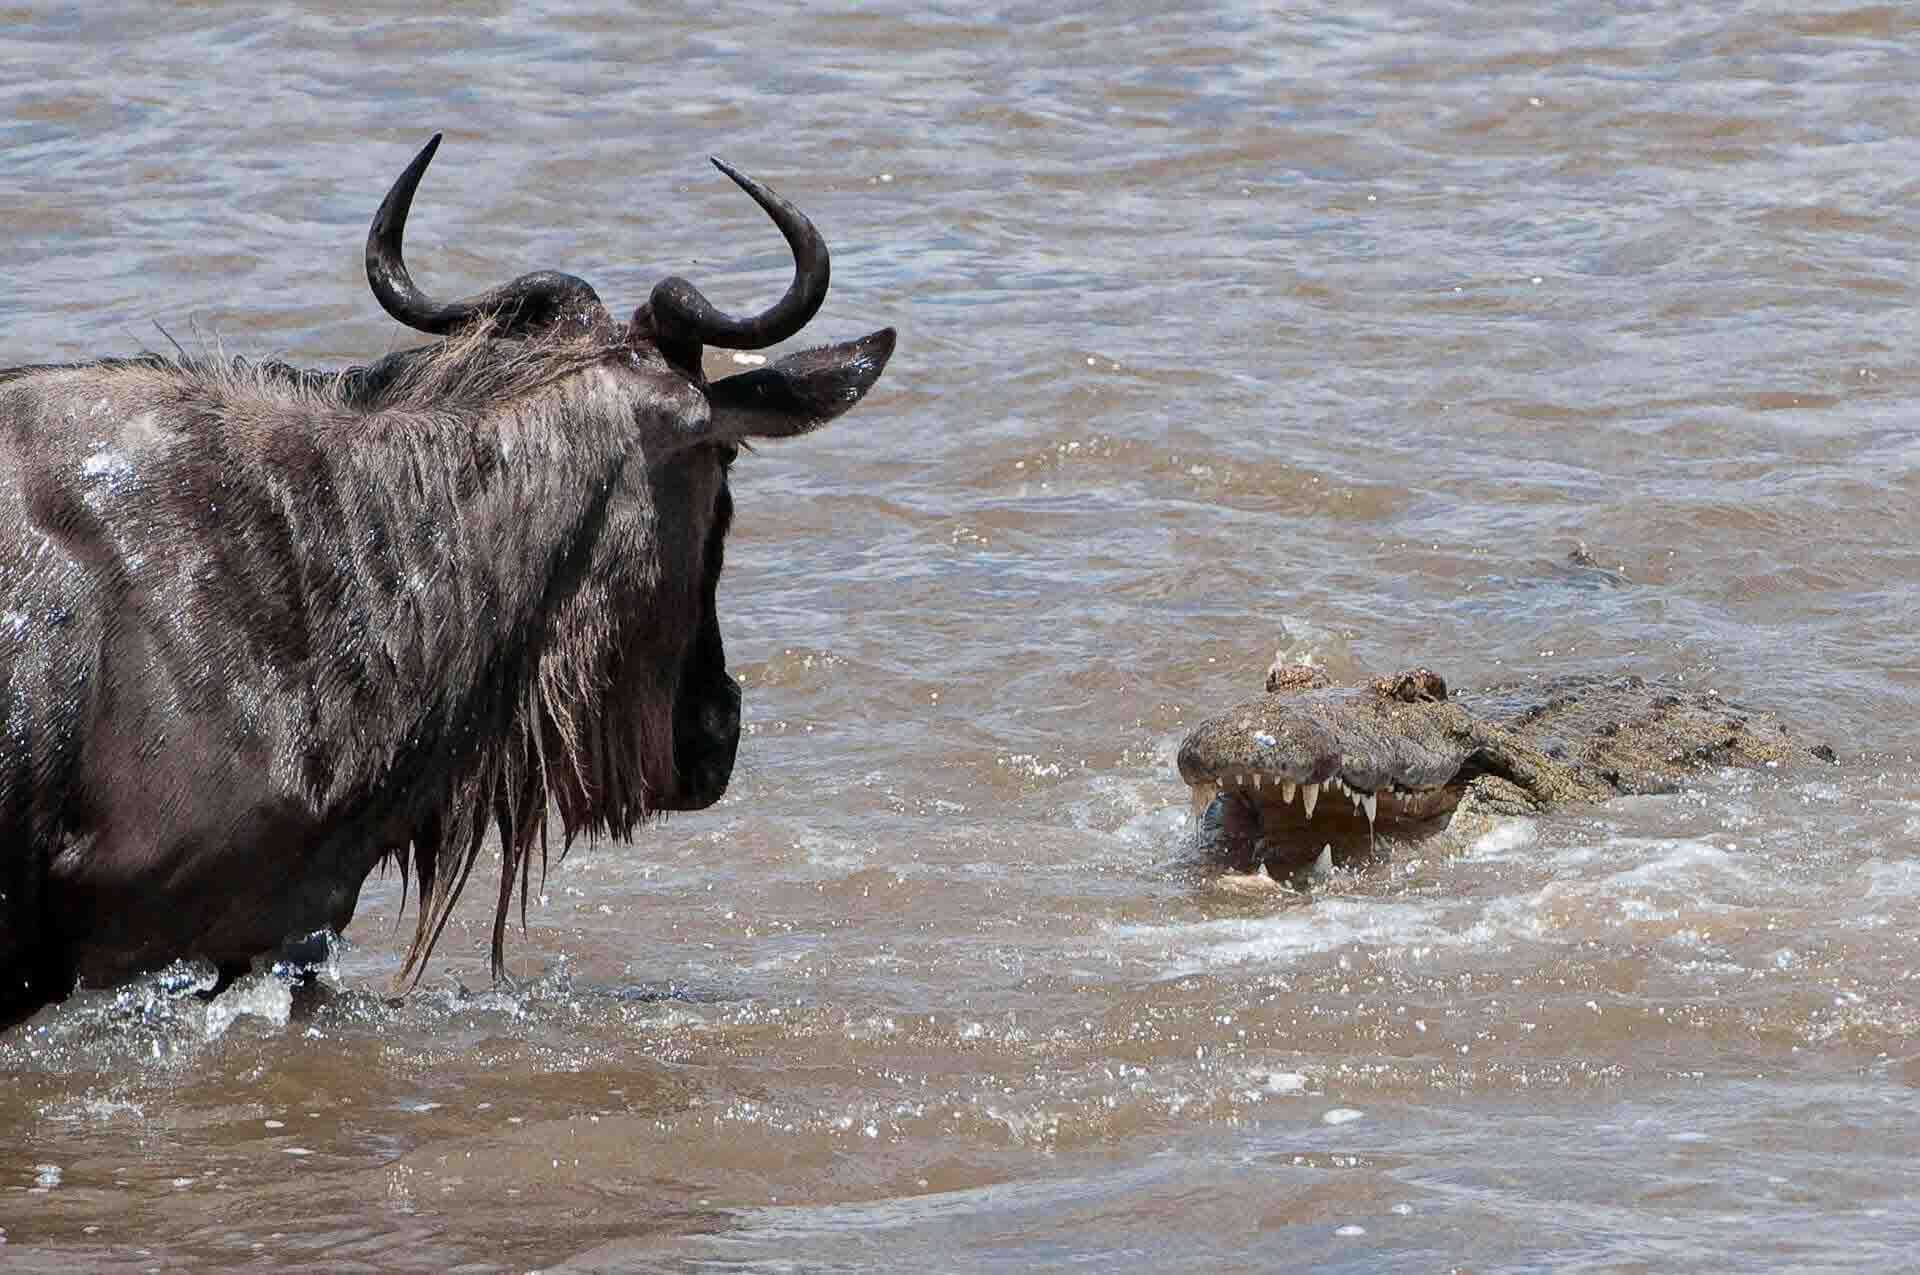 how did the wildebeest get its name and what does it mean